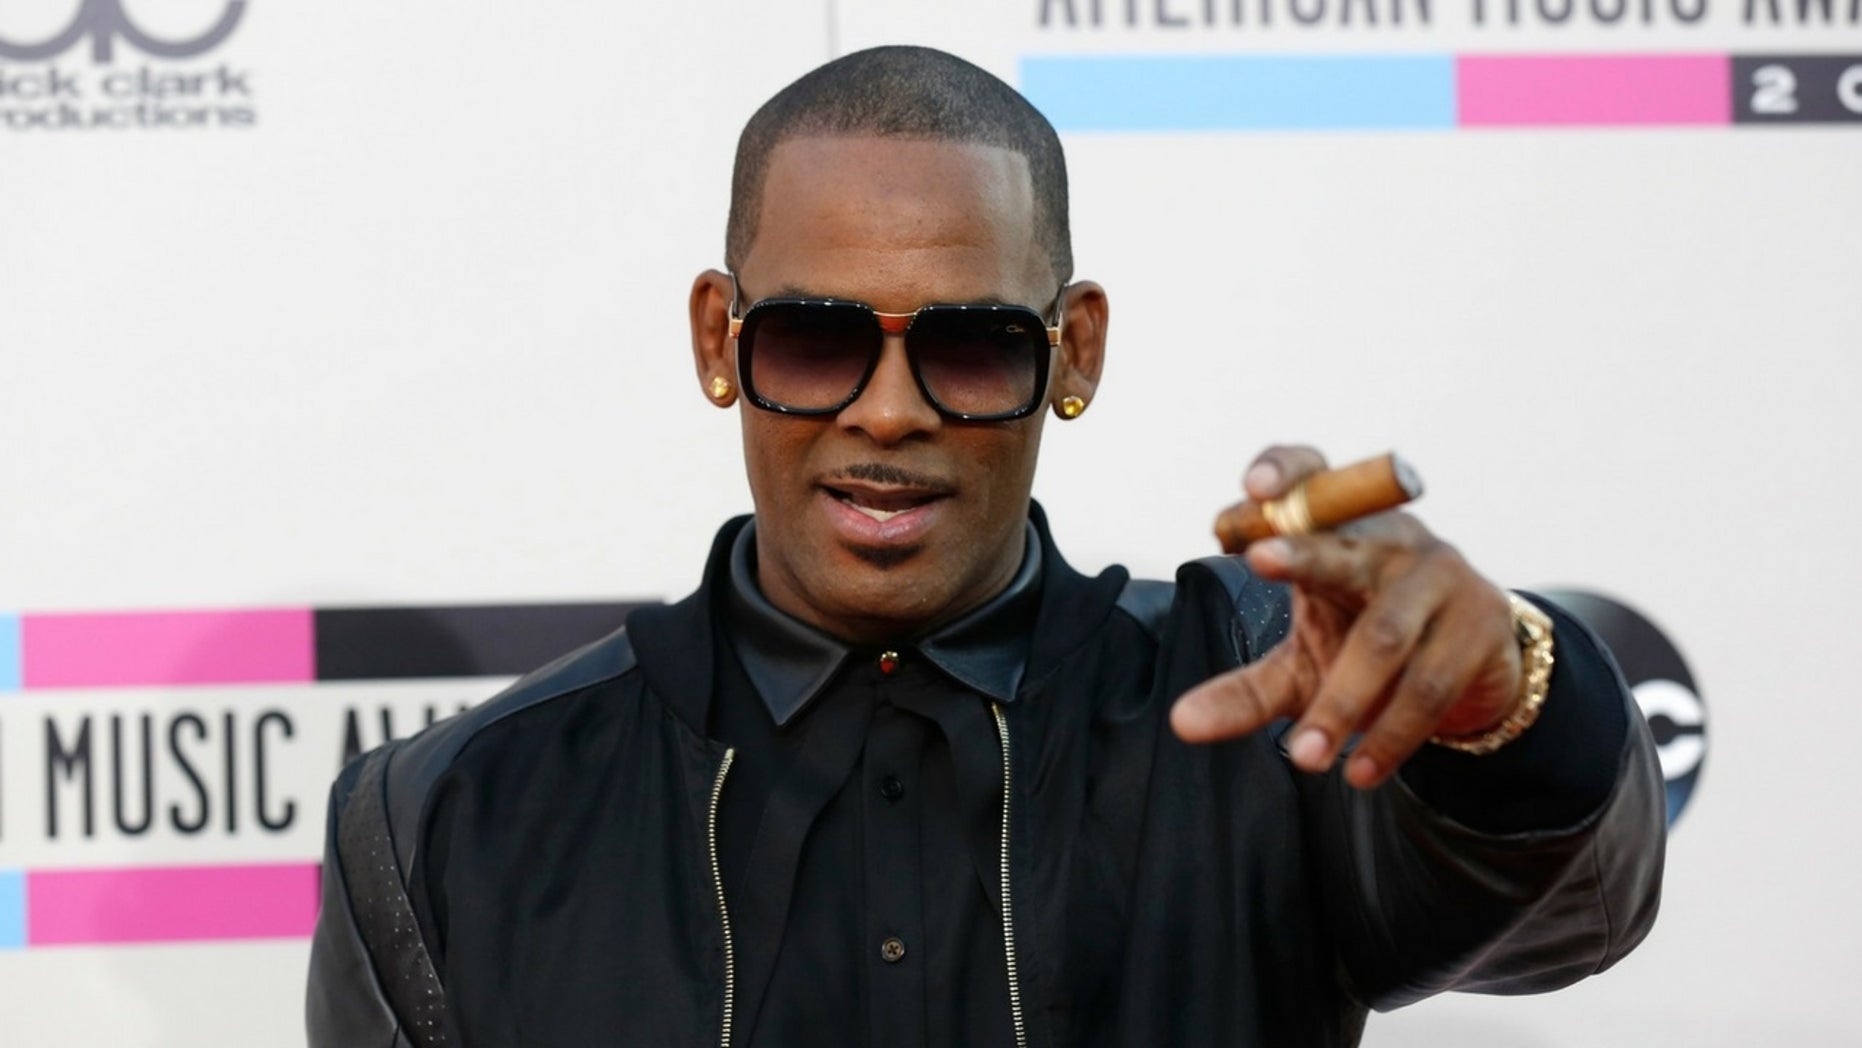 R. Kelly accusers say singer needs help after years of alleged abuse: ‘He’s got some demons in him’